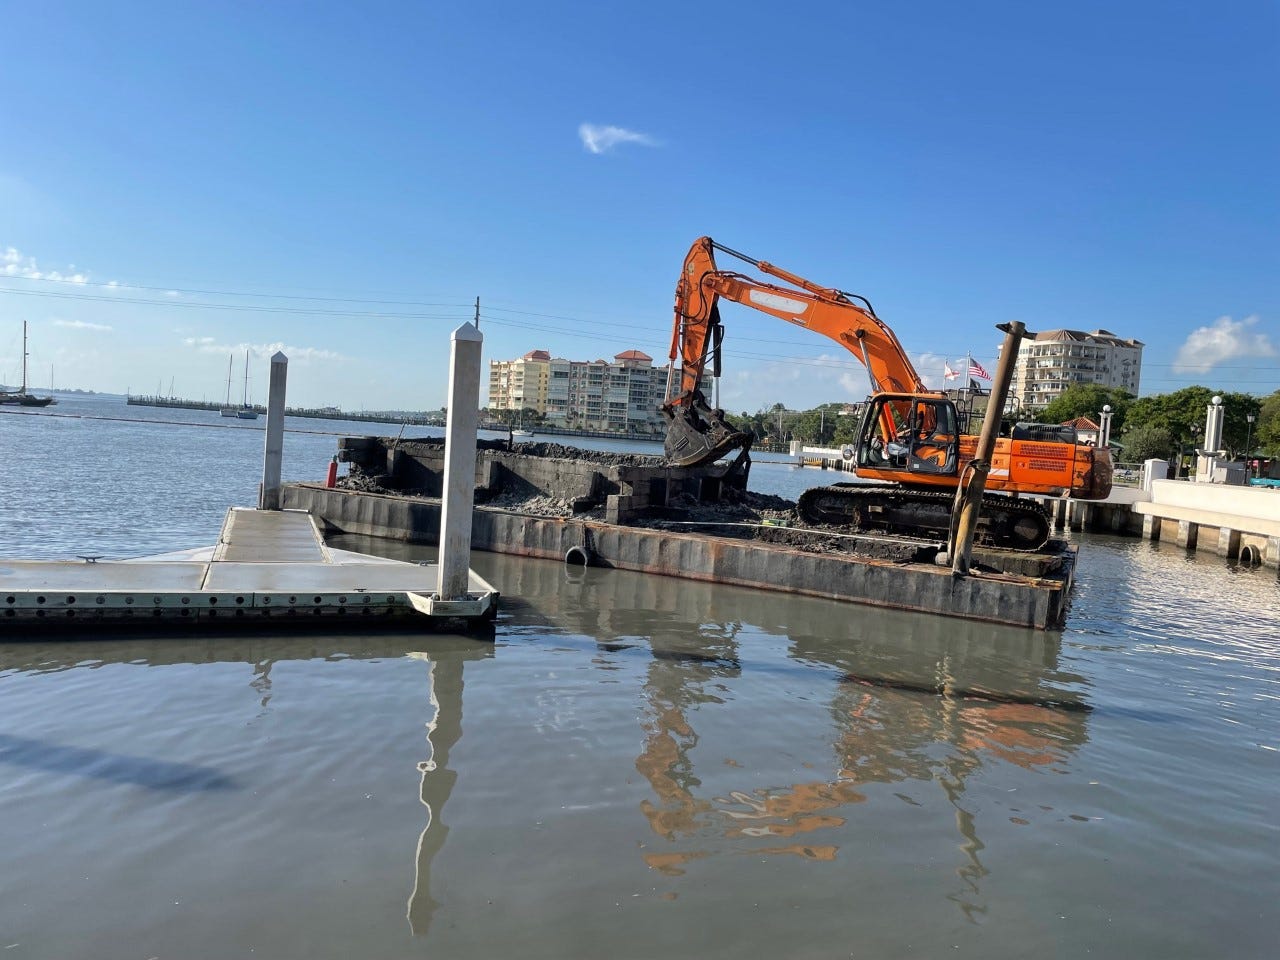 Lee Wenner Park in Cocoa Village getting boat ramp upgrades